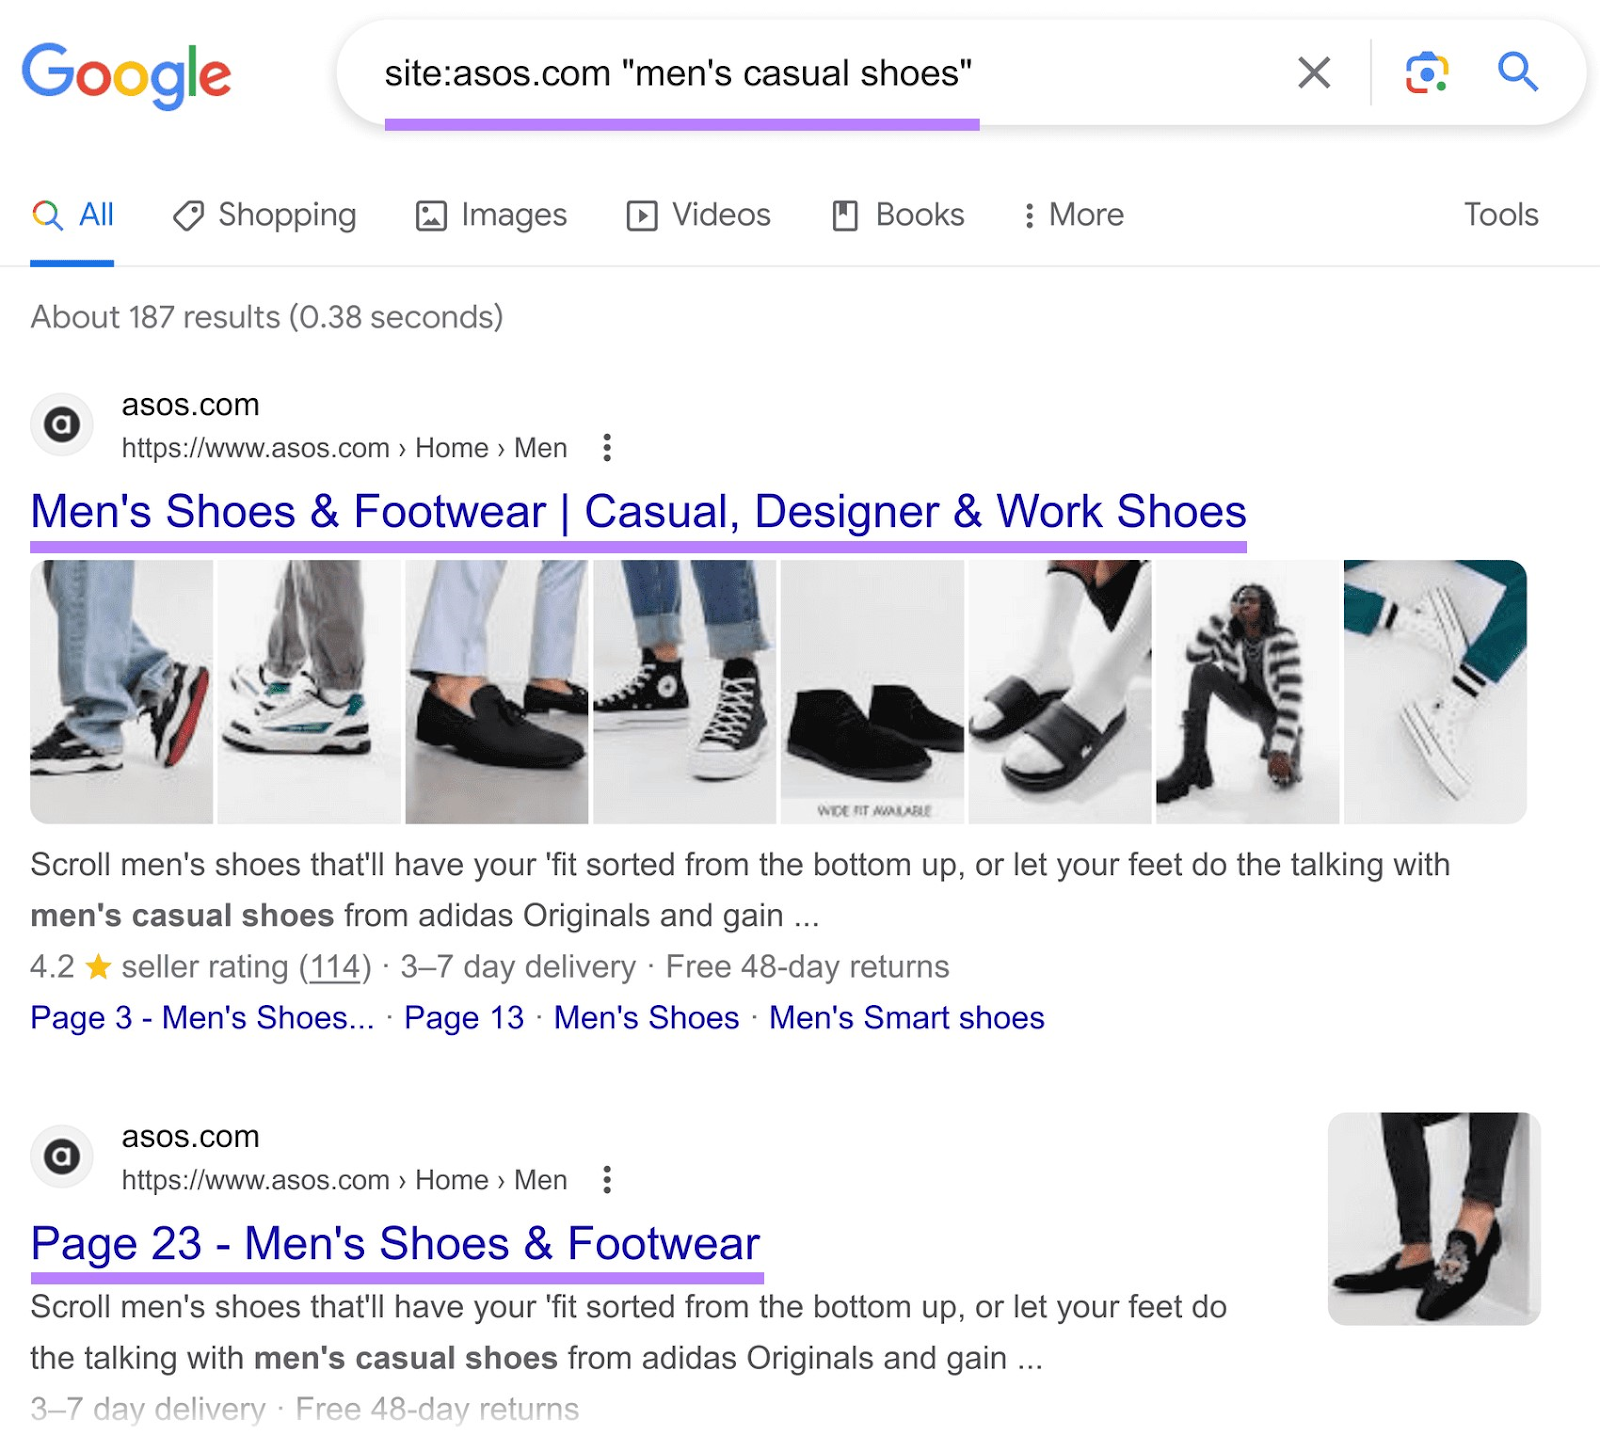 Google search results for "site:asos.com "men's casual shoes""